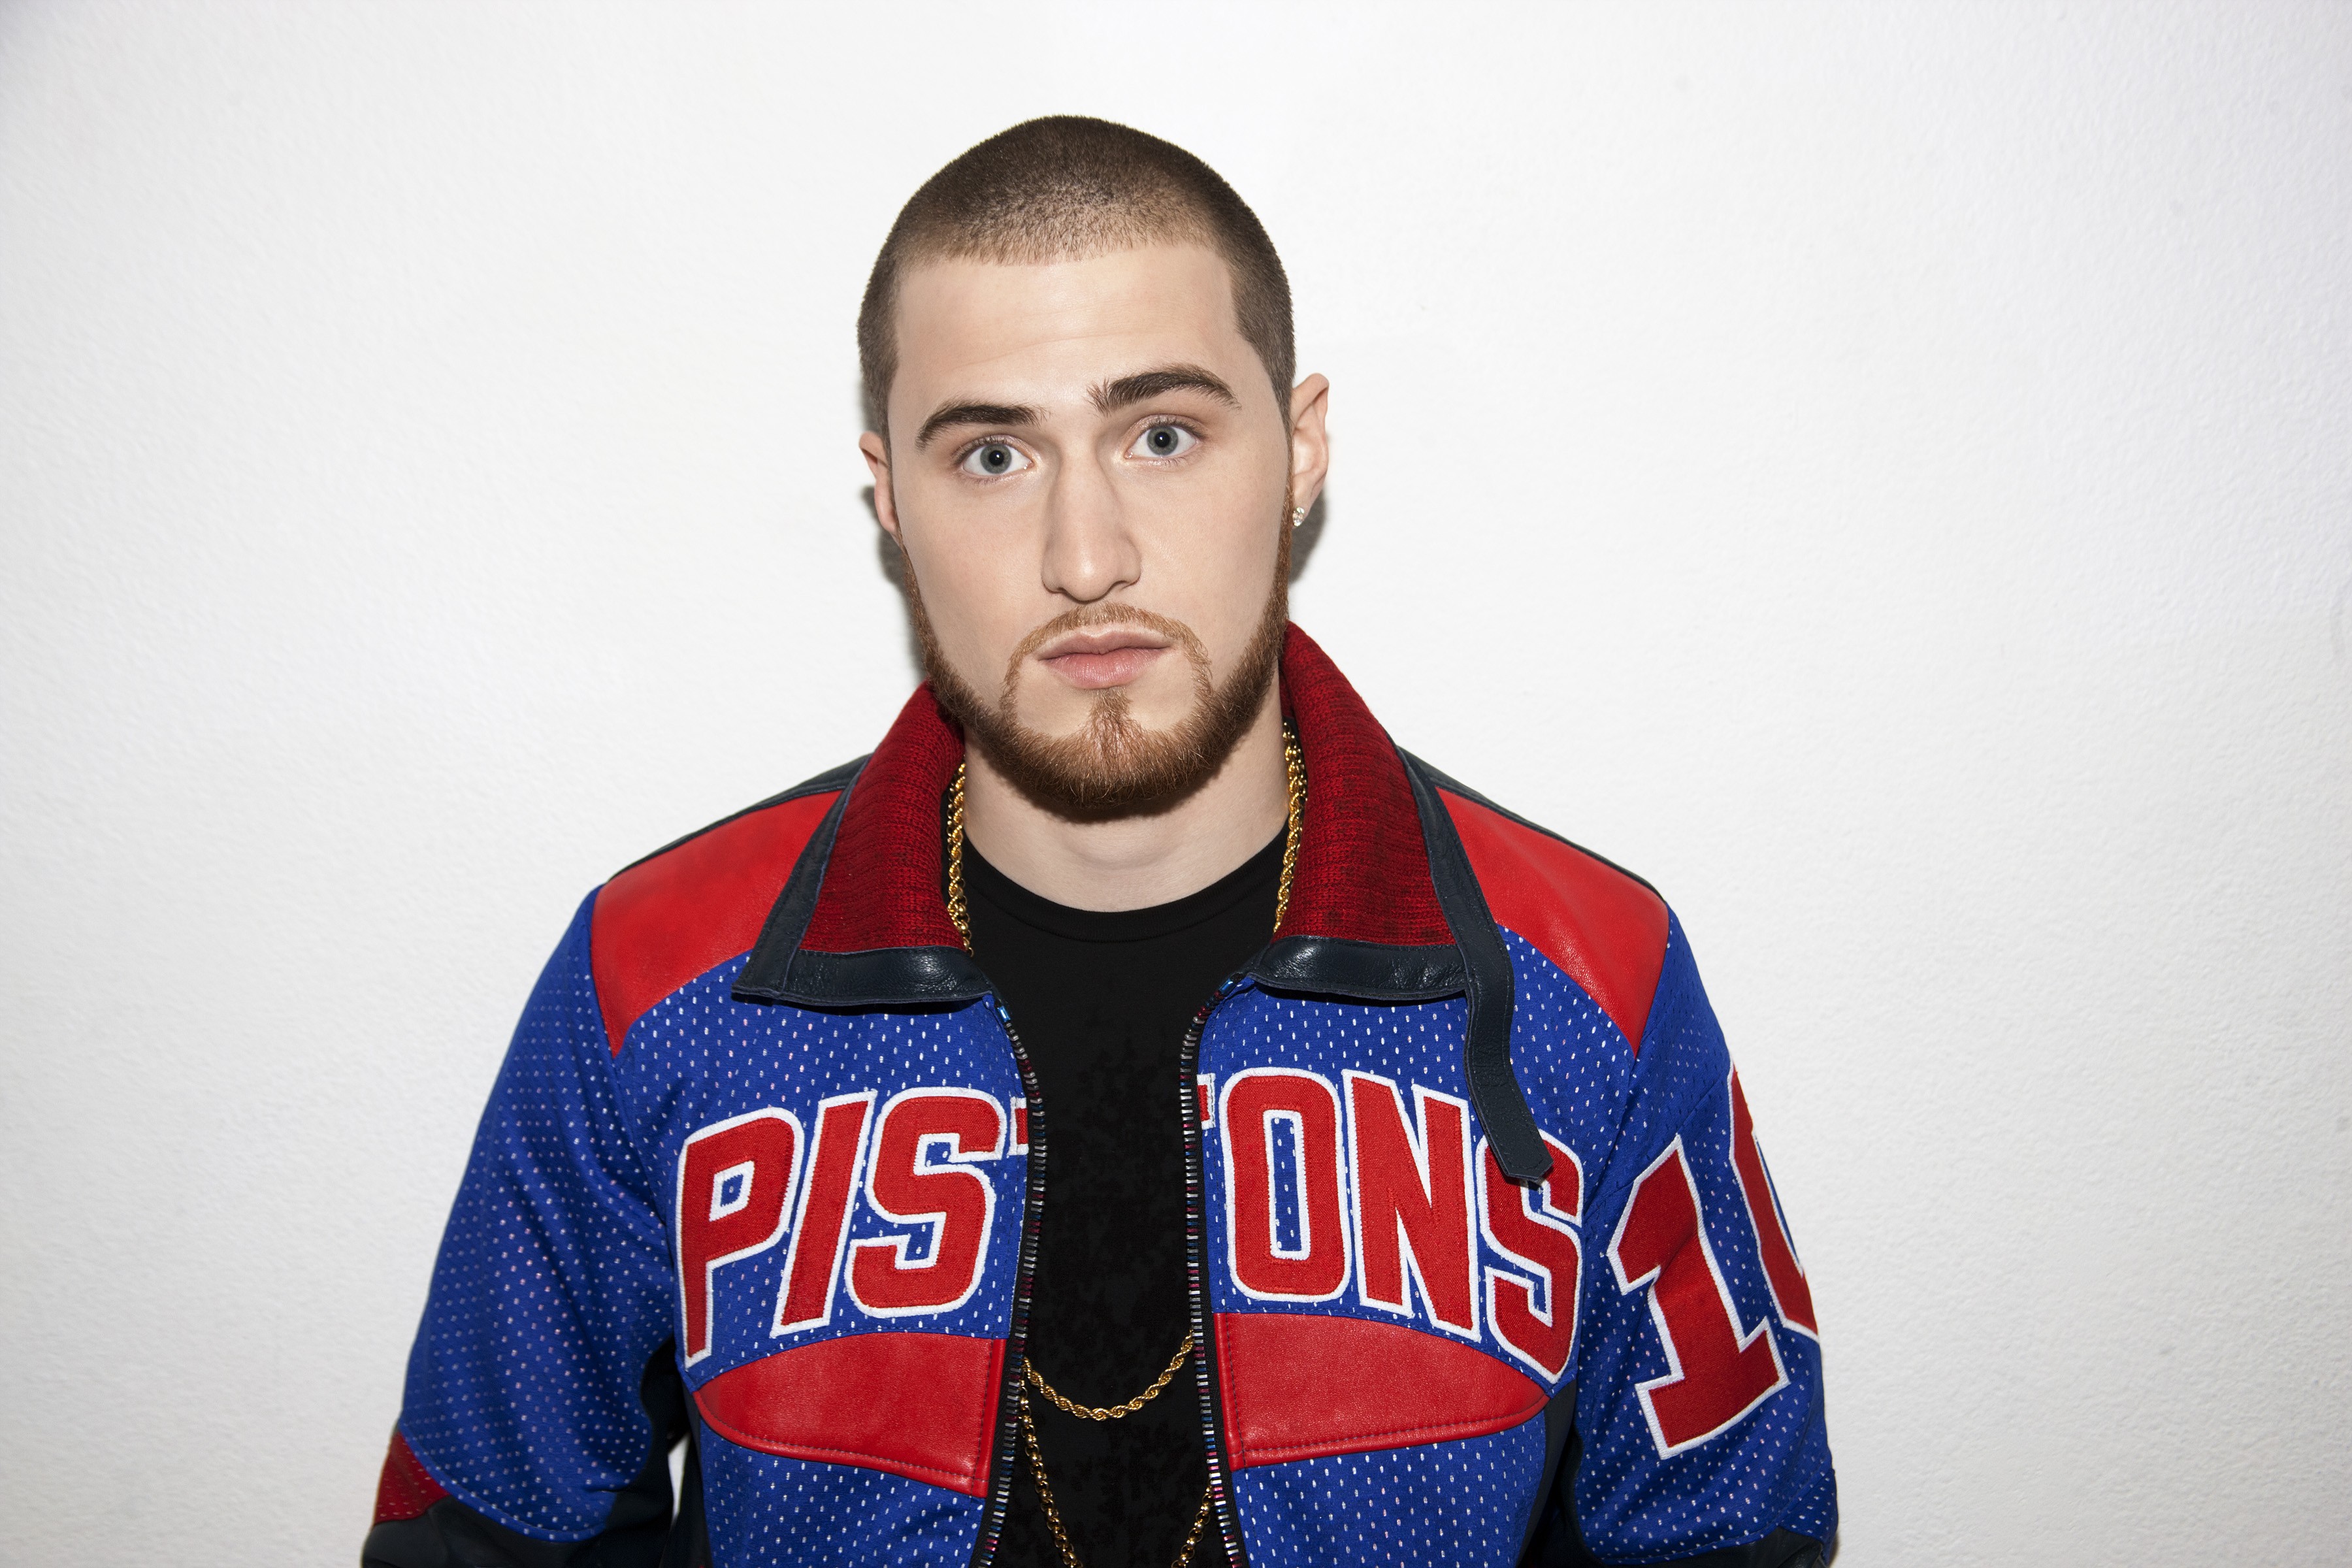 is Mike Posner in this Mike Posner video? | Slang